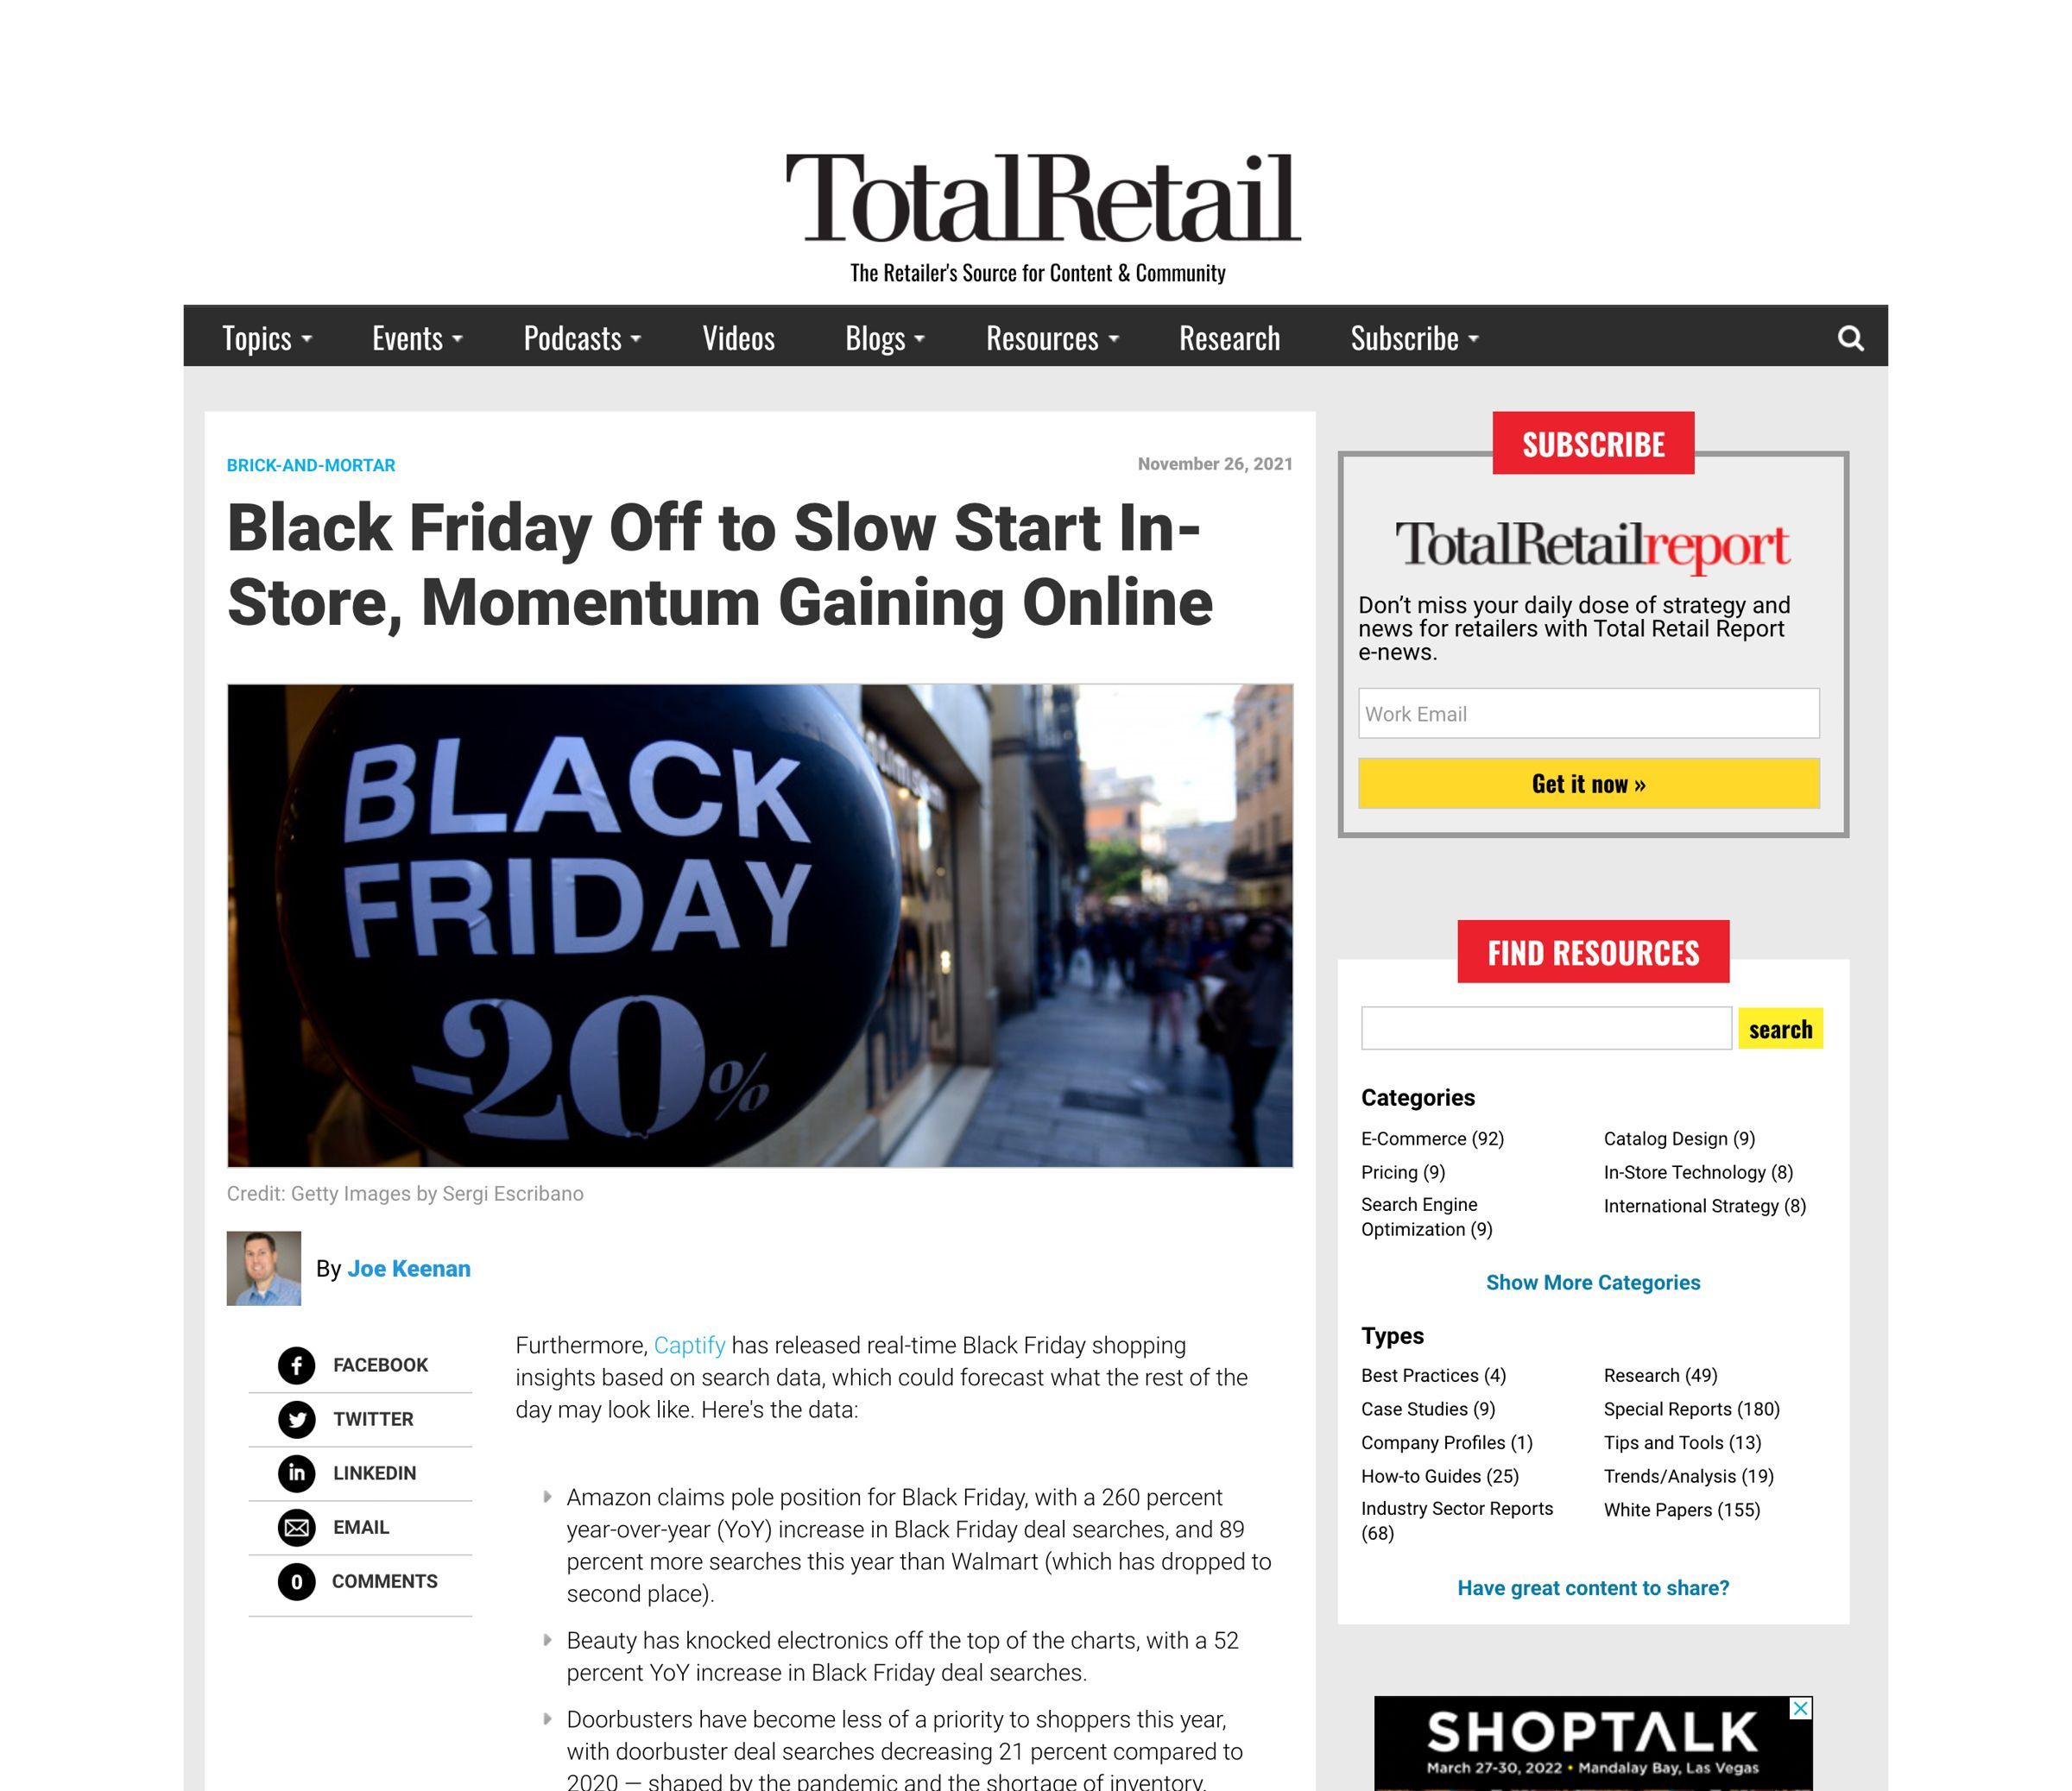 Total Retail: Black Friday Off to Slow Start In-Store, Momentum Gaining Online